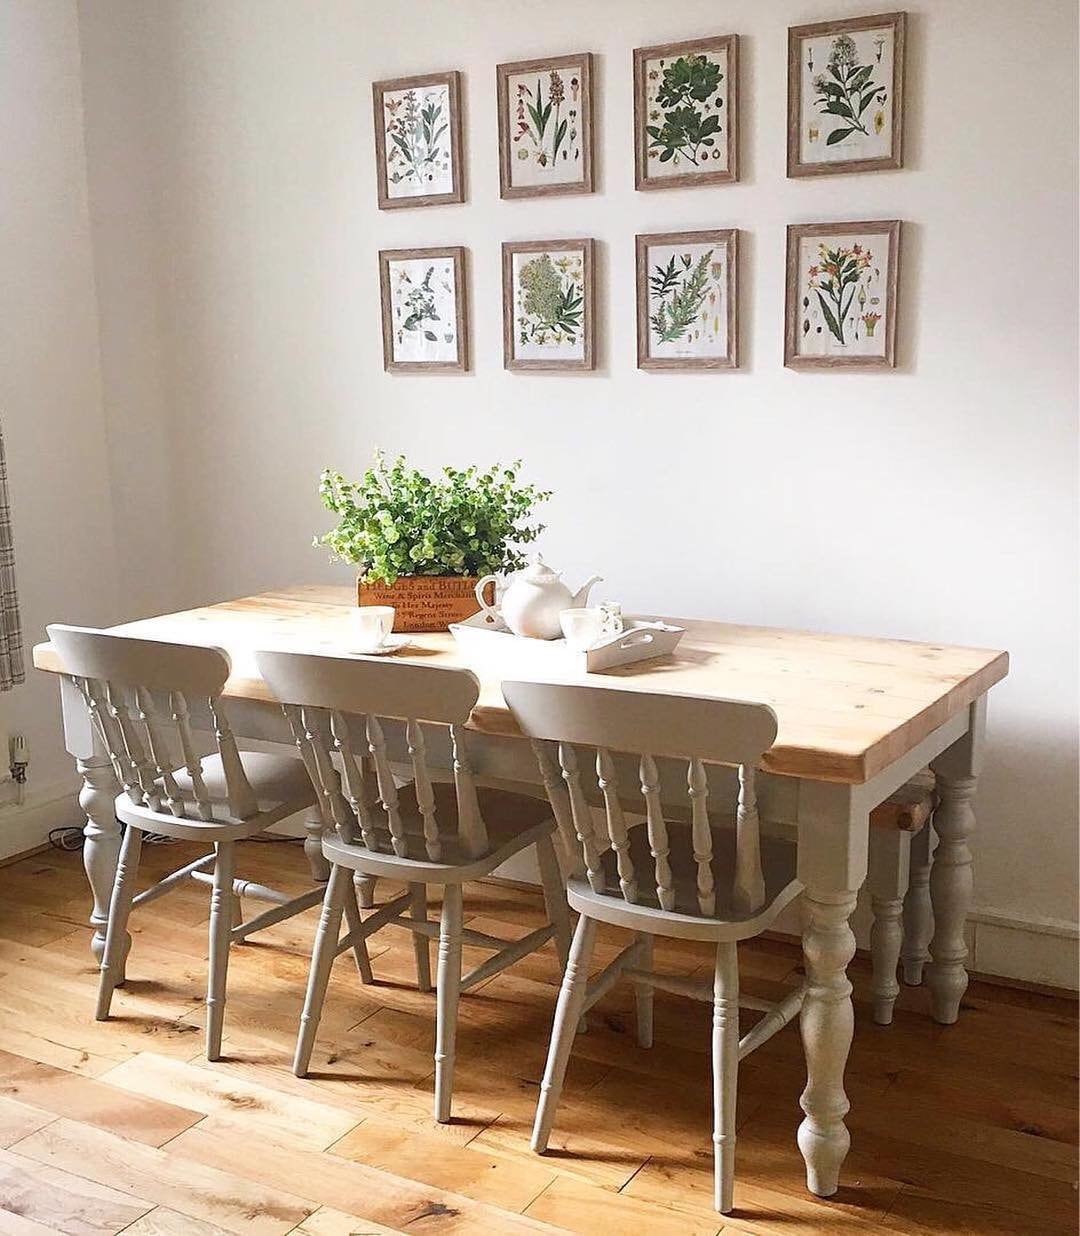 6ft Farmhouse Dining Table With Matching Bench and 3 Chairs. - Etsy Canada